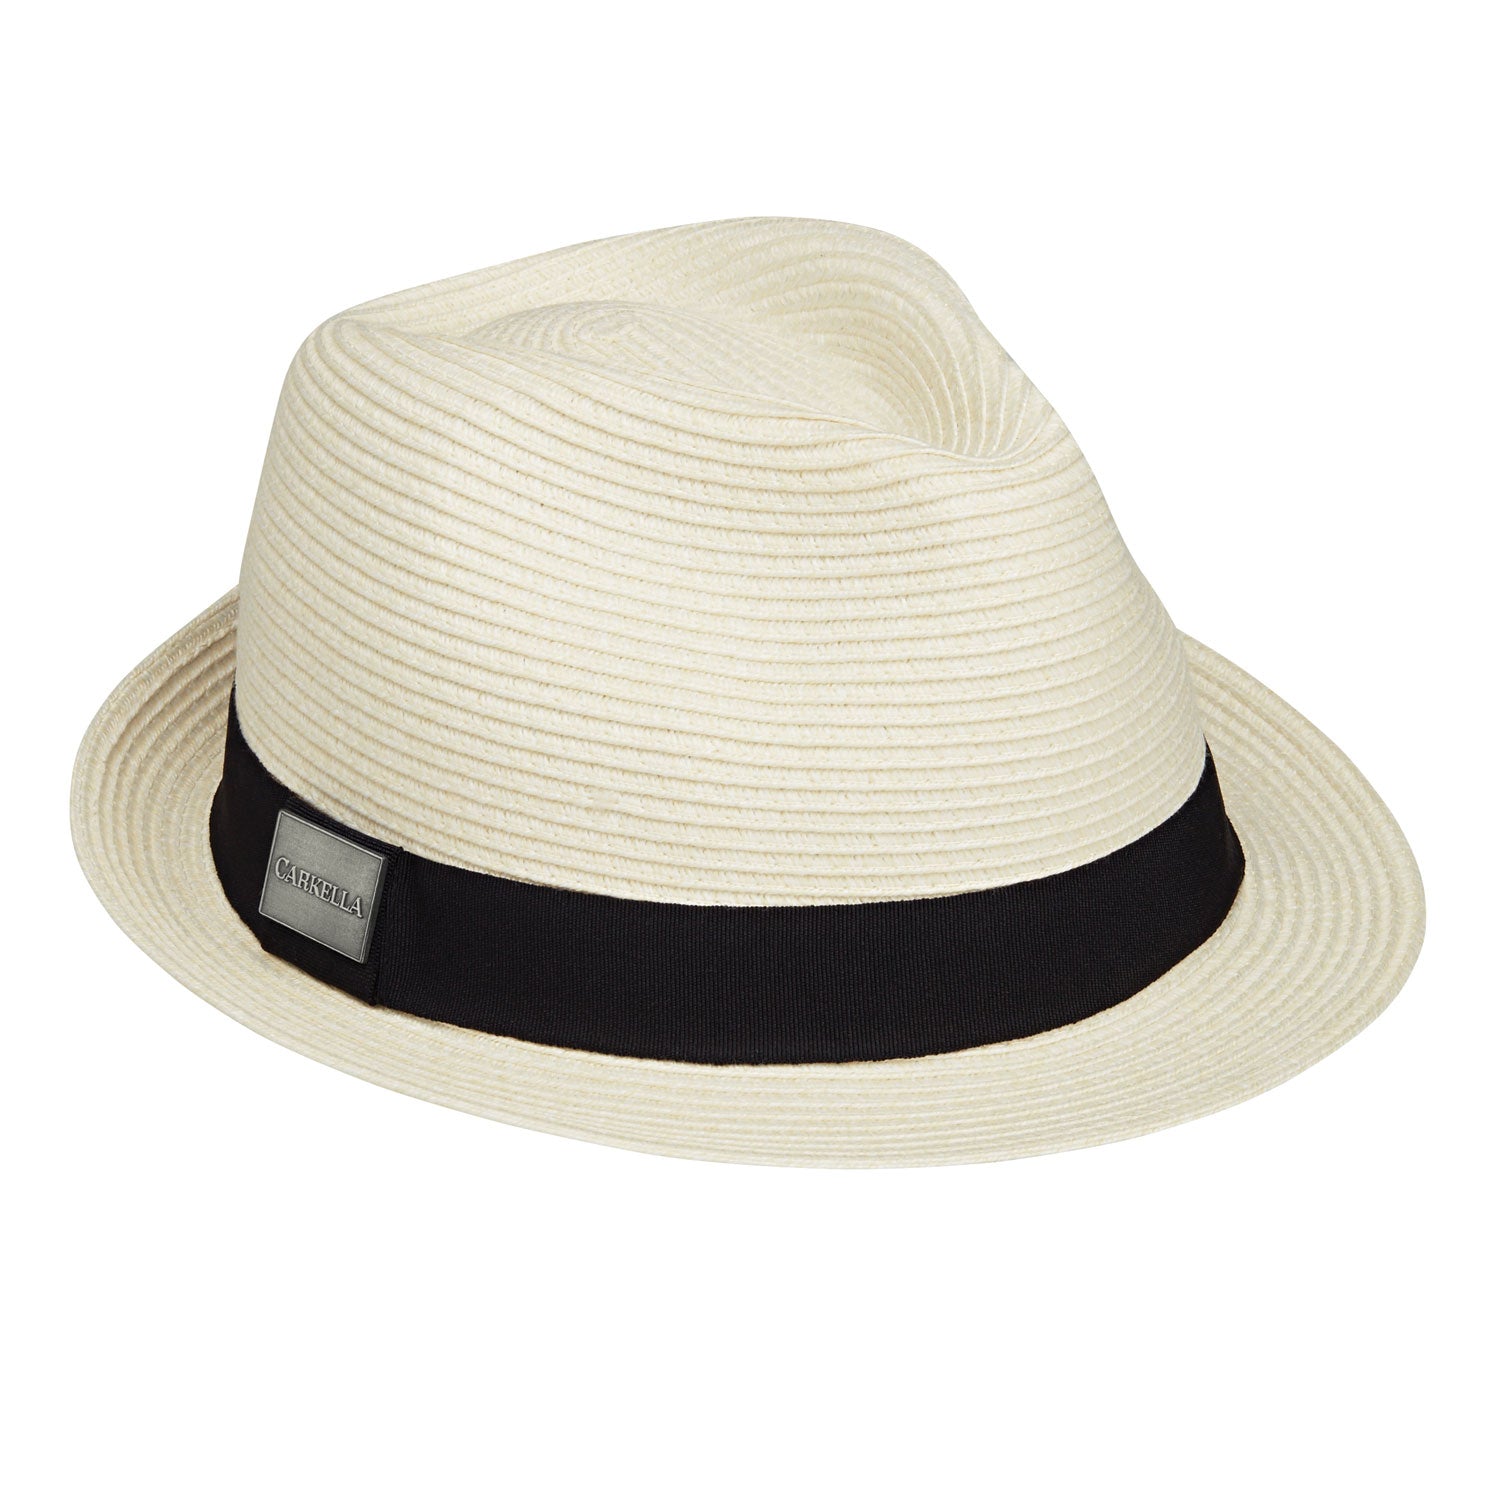 Featuring Carkella Del Mar Trilby style fedora sun hat for men and women